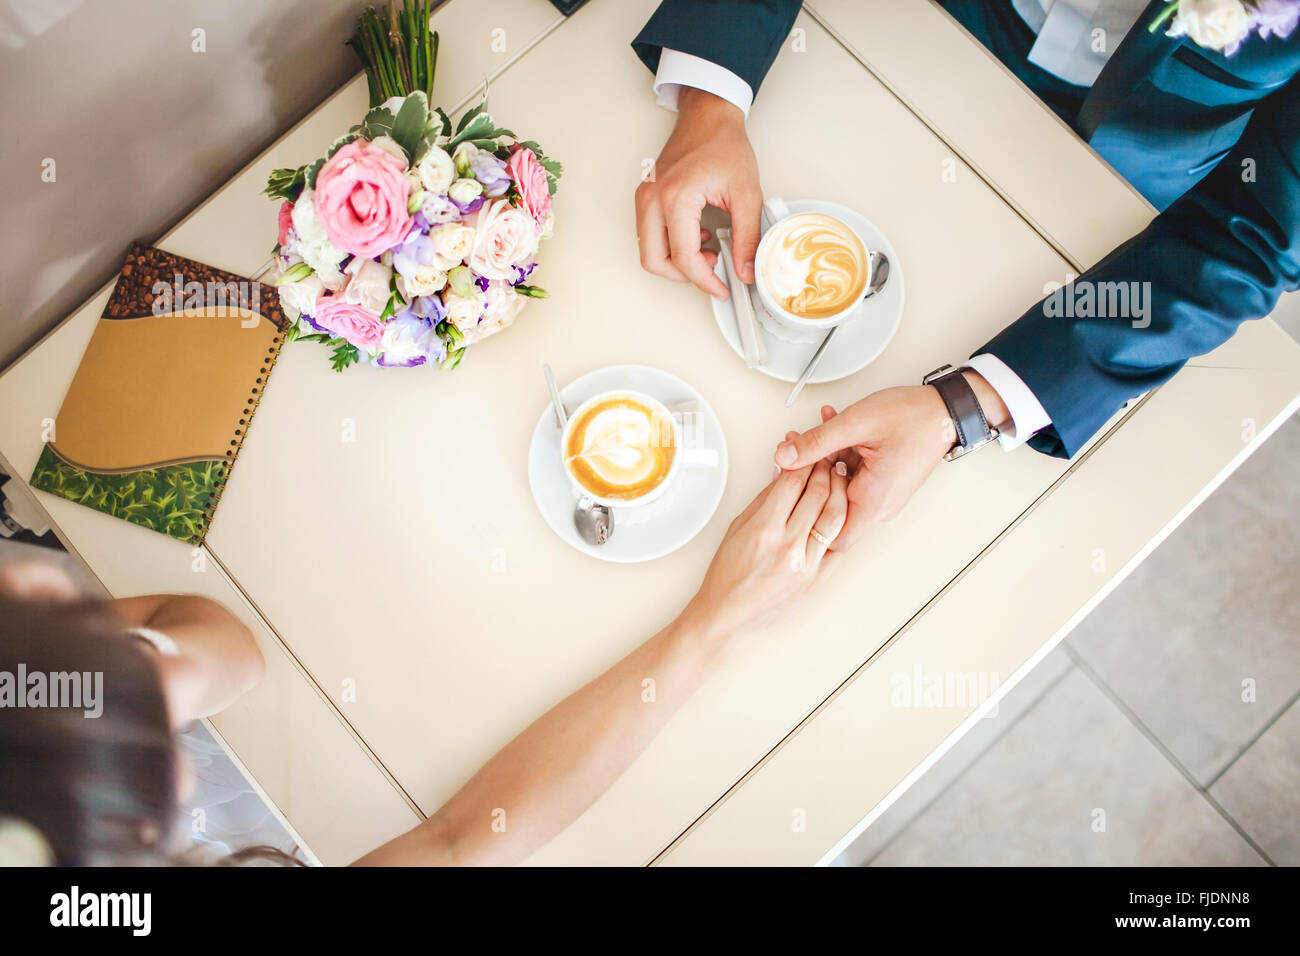 Wedding couple at cafe, top view. Man holds woman's hand, drinks espresso. Bride and groom coffee break dating gift, bouquet on table. Stock Photo